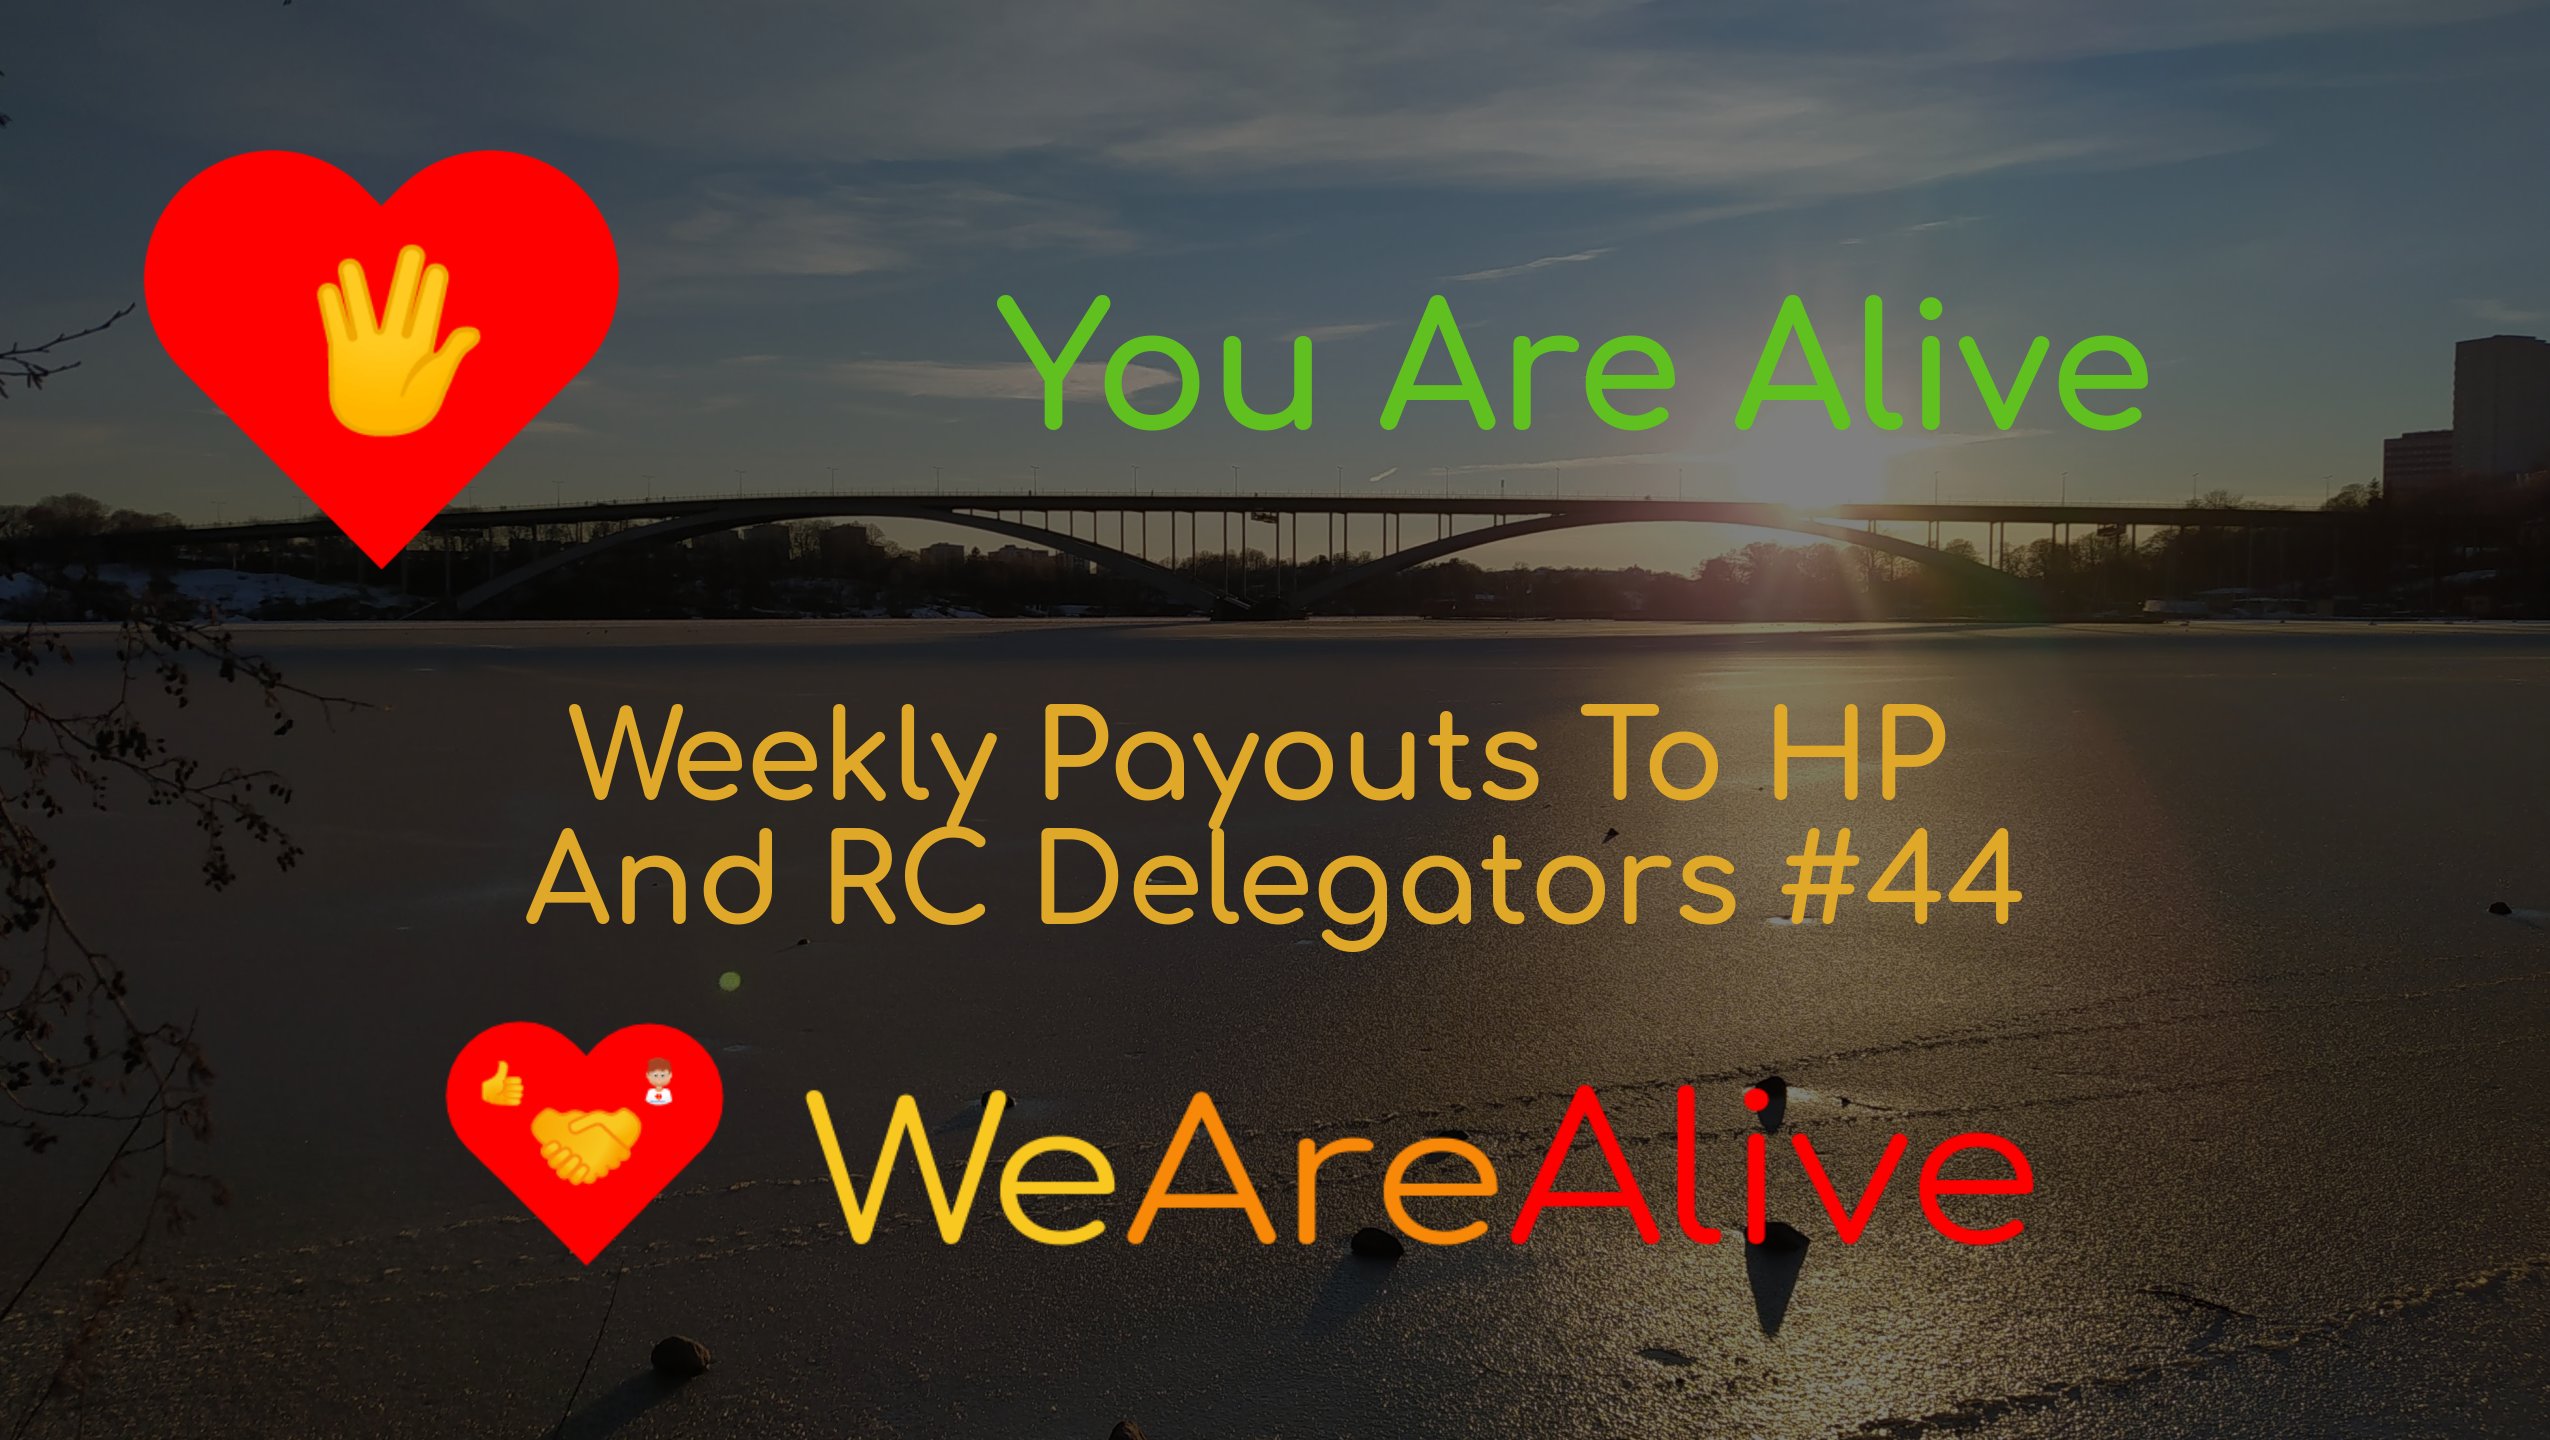 @youarealive/you-are-alive-weekly-payouts-to-hp-and-rc-delegators-44